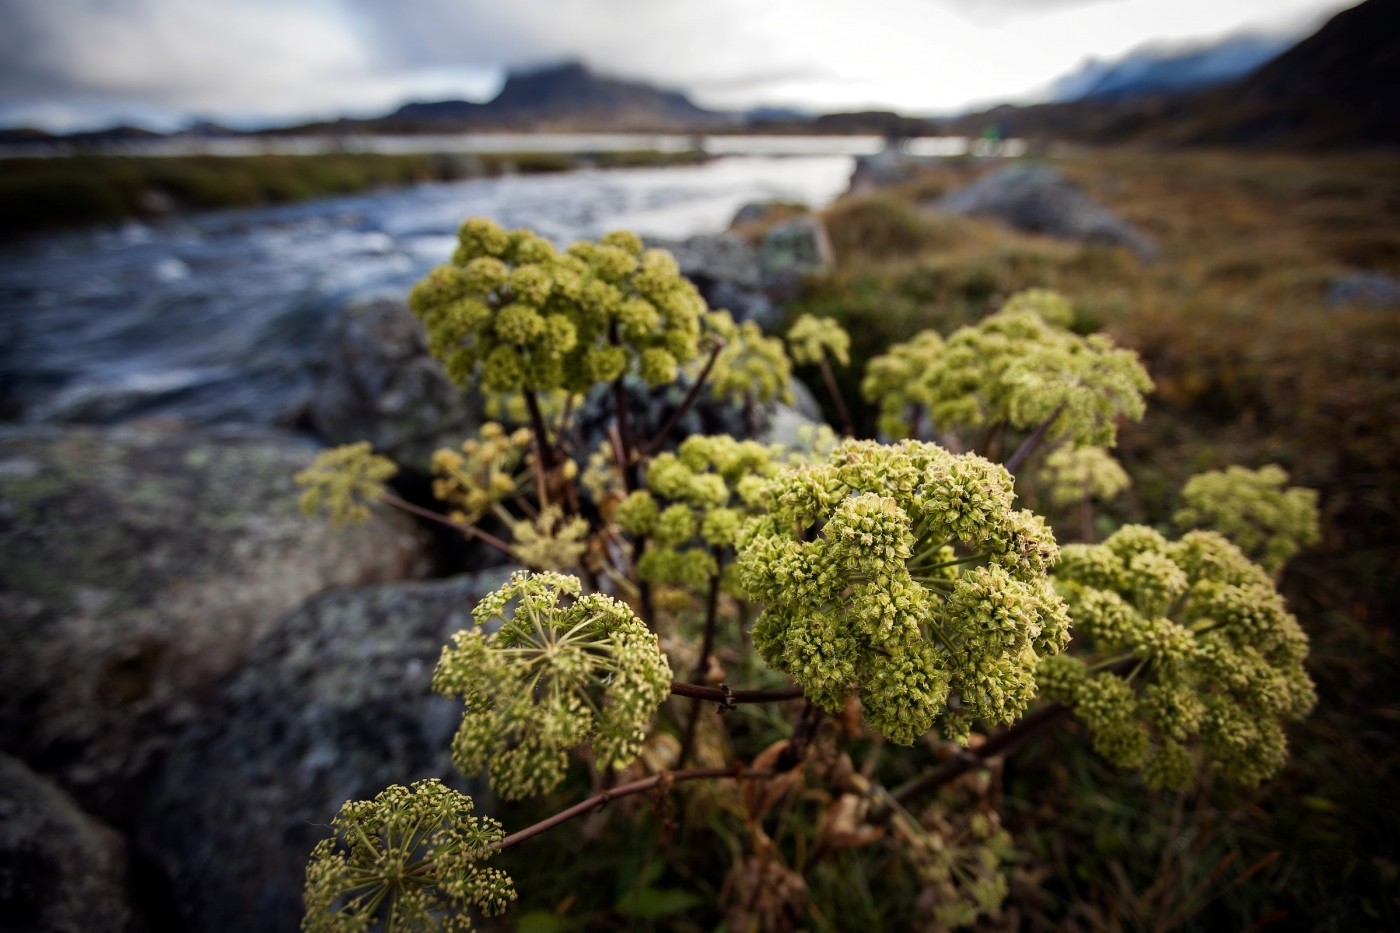 Angelica growing on the river banks of the Erfalik in Greenland. Photo by Mads Pihl - Visit Greenland